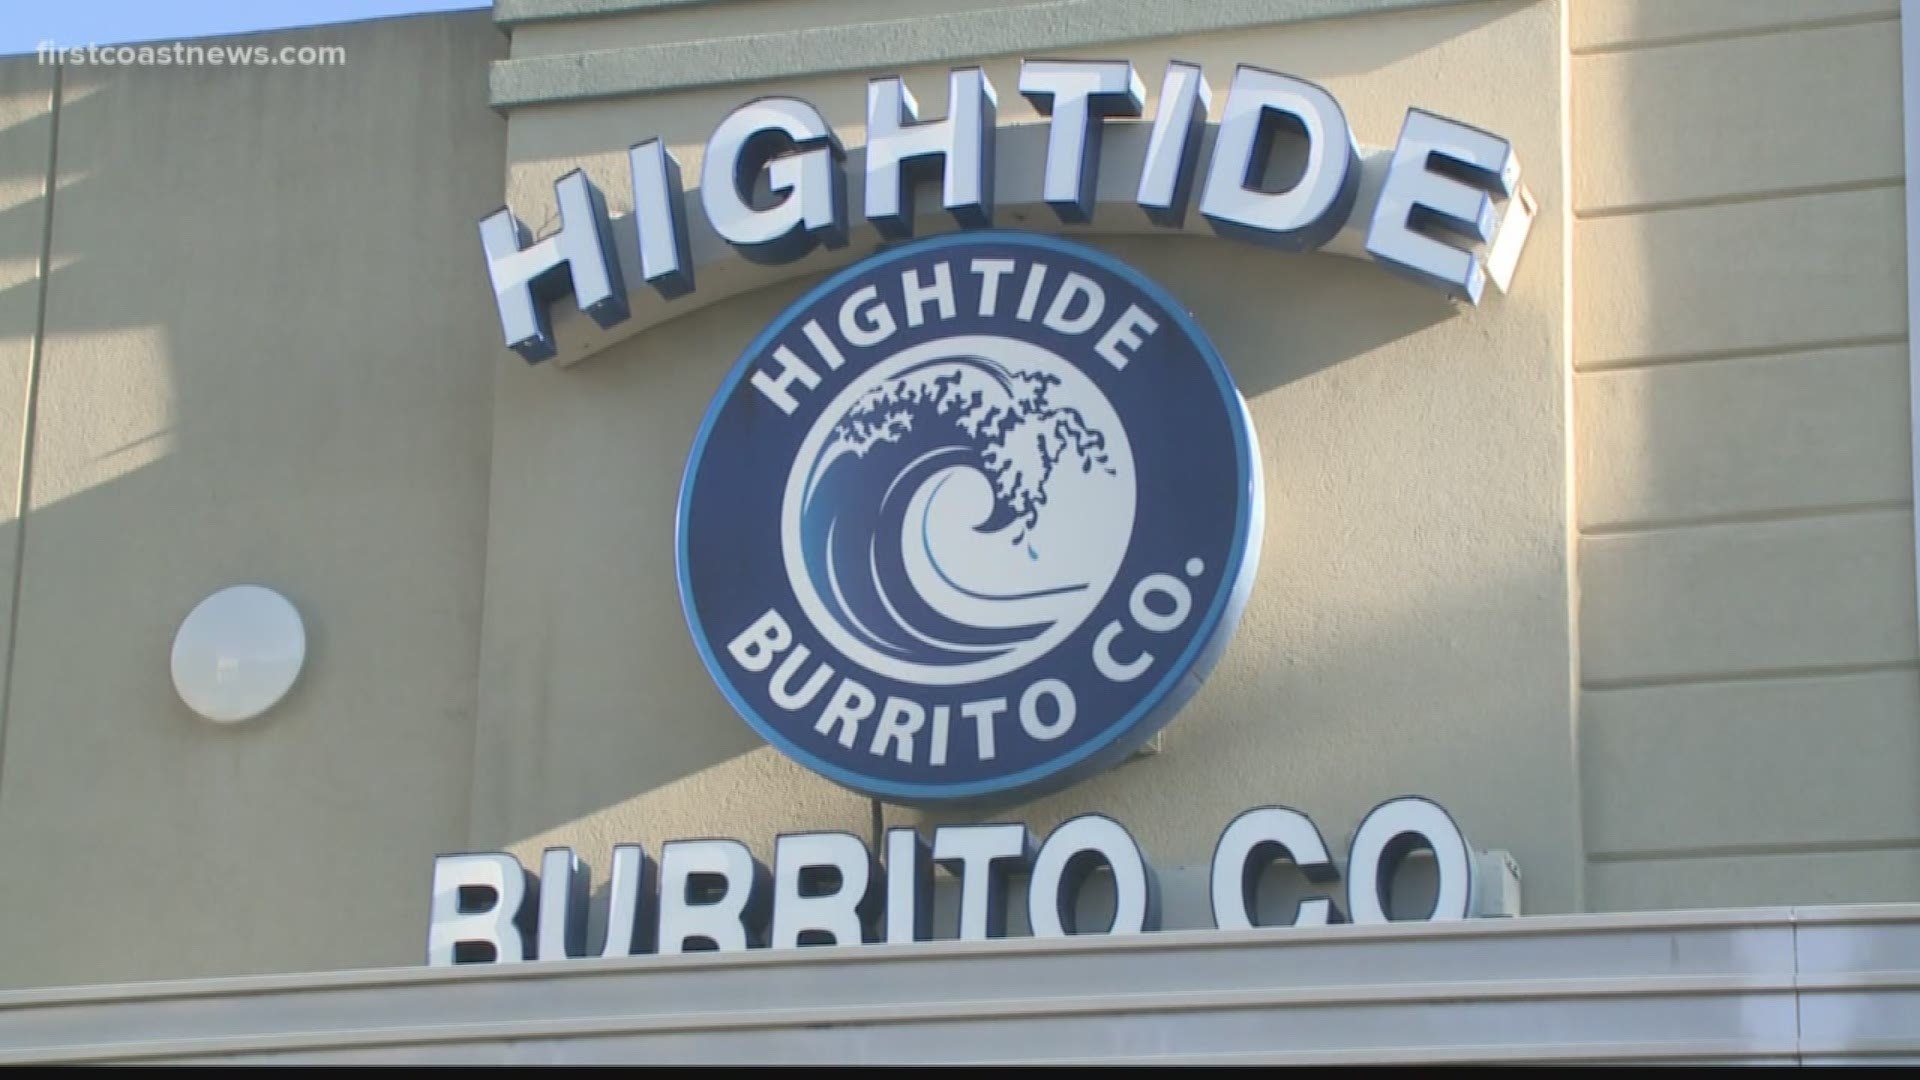 Hightide Burrito Co. is asking its customers to add a reduced-cost meal for healthcare workers to their orders through the "burritos for heroes" campaign.